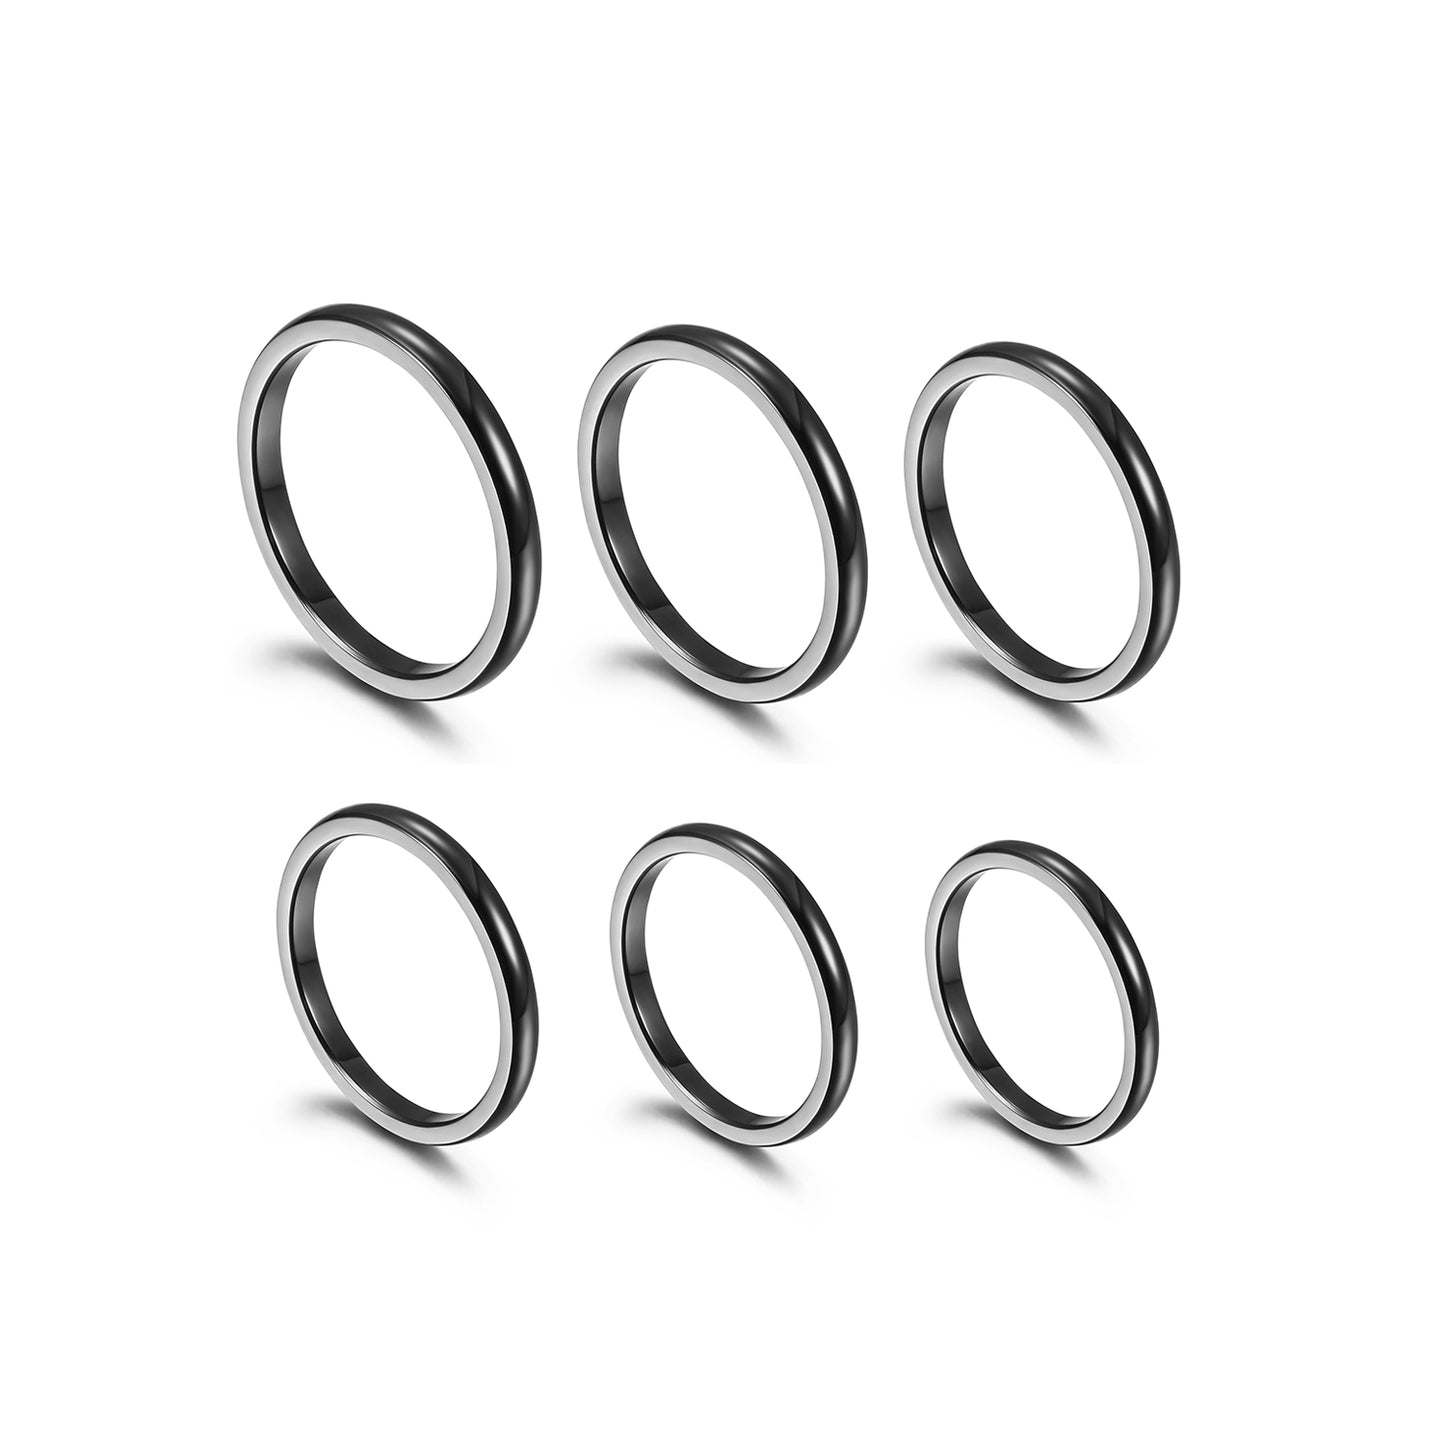 Load image into Gallery viewer, Black Thin Stack Rings, Set of 6, Size 4-9
